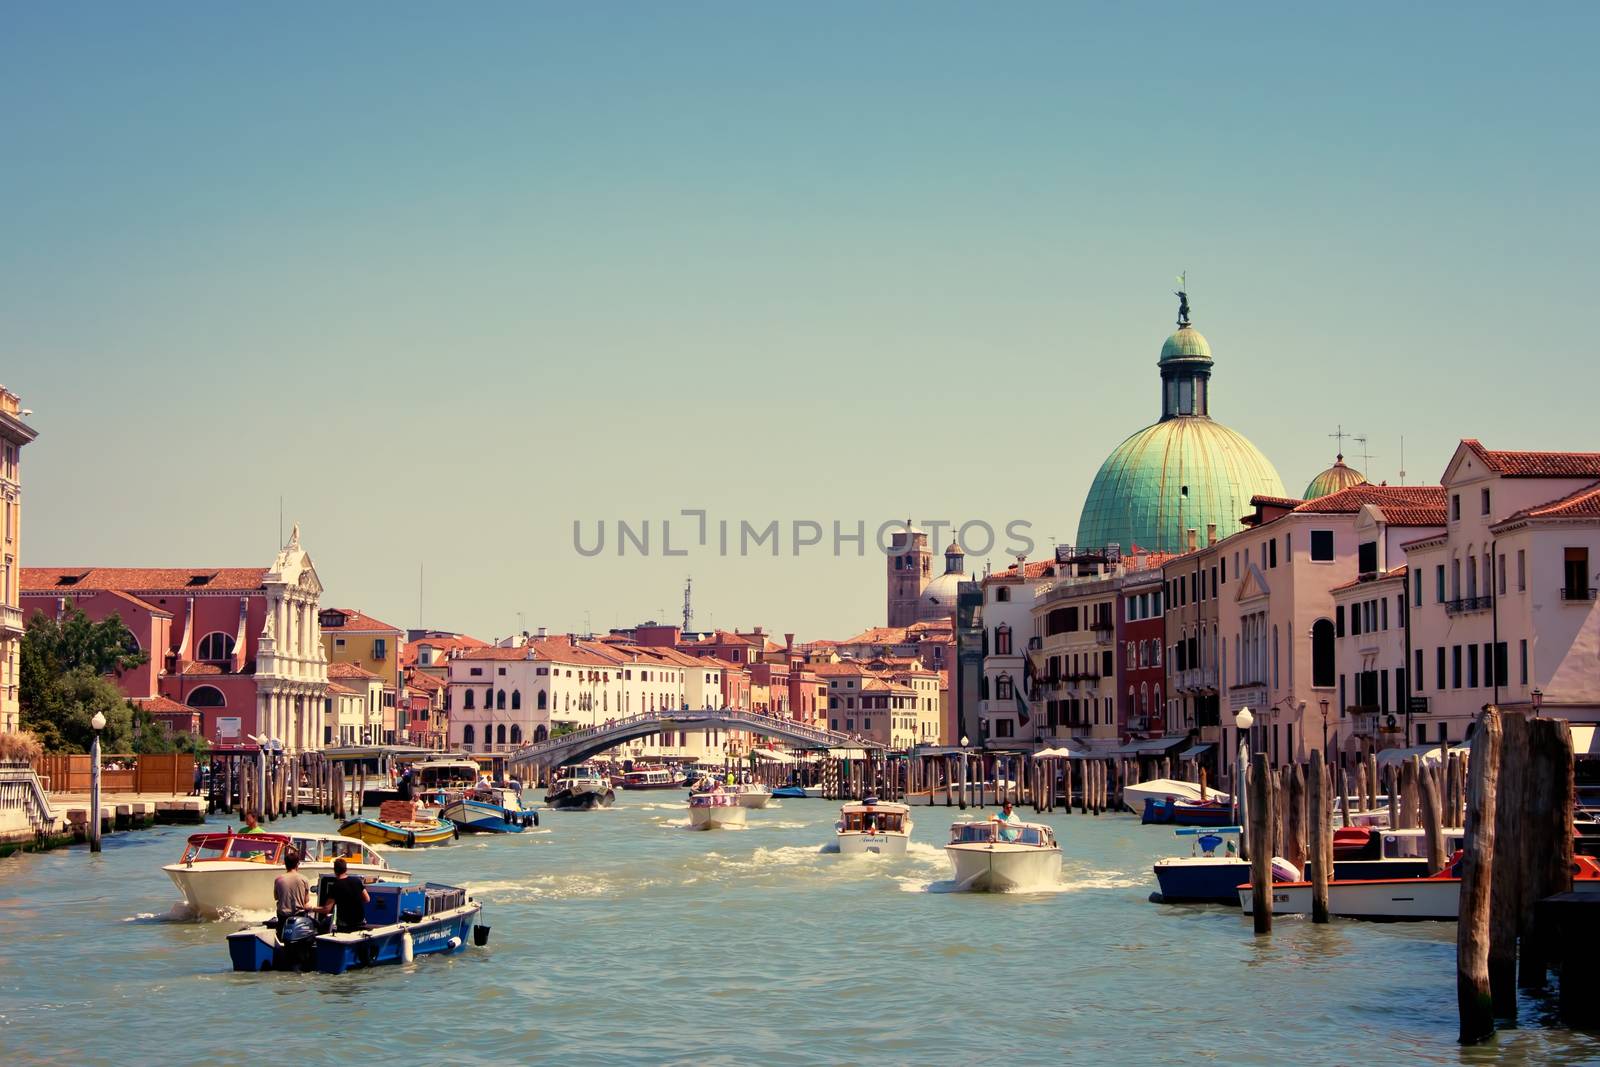 Grand Canal with boats and beautiful architecture in Venecia, Italy.